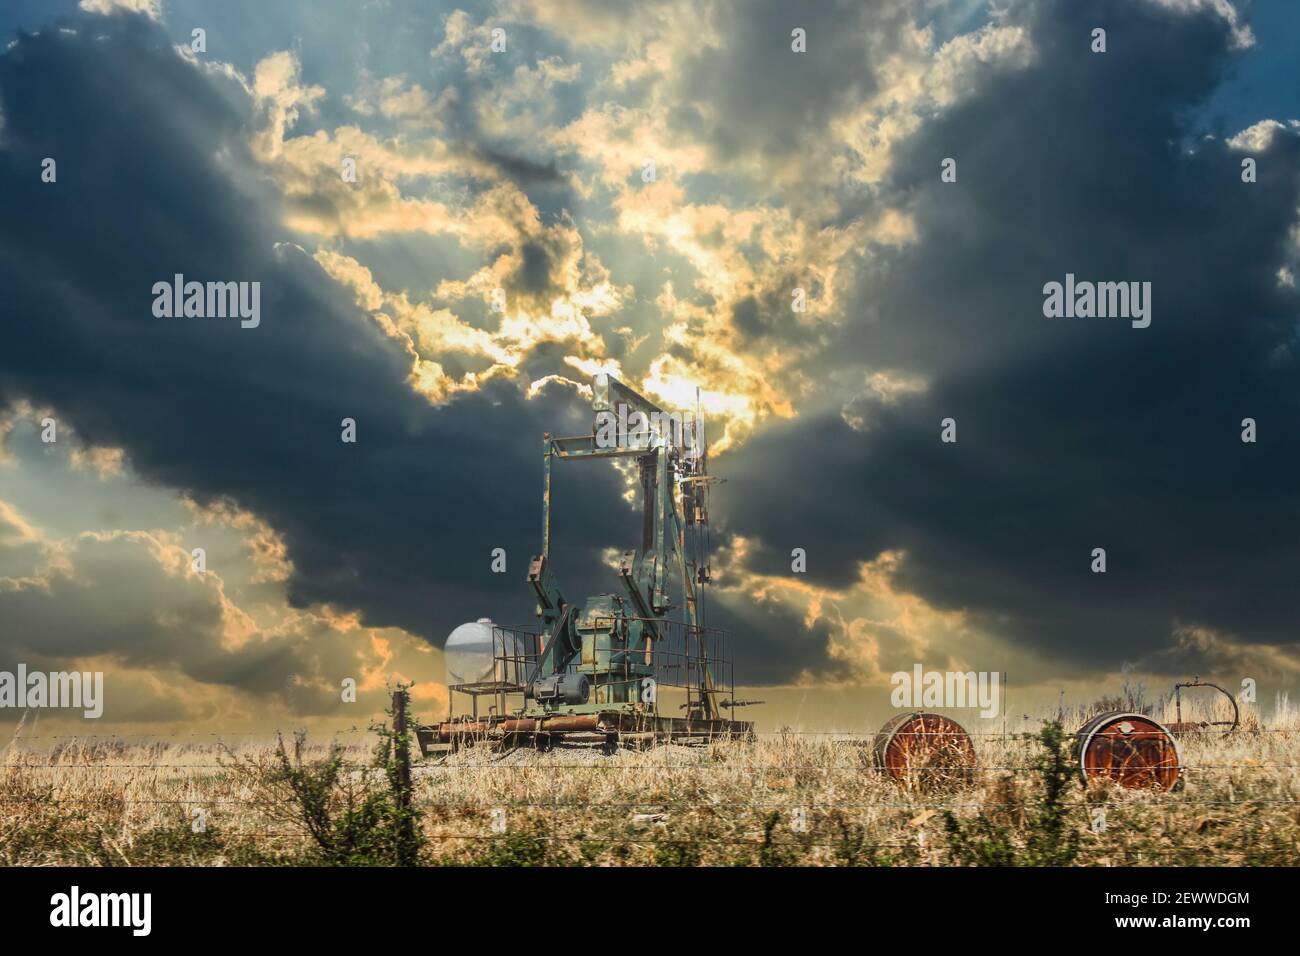 Oil well pump jack in field with old oil barrels behind barbed wire fence under dramatic sunset sky with dark oninous clouds Stock Photo